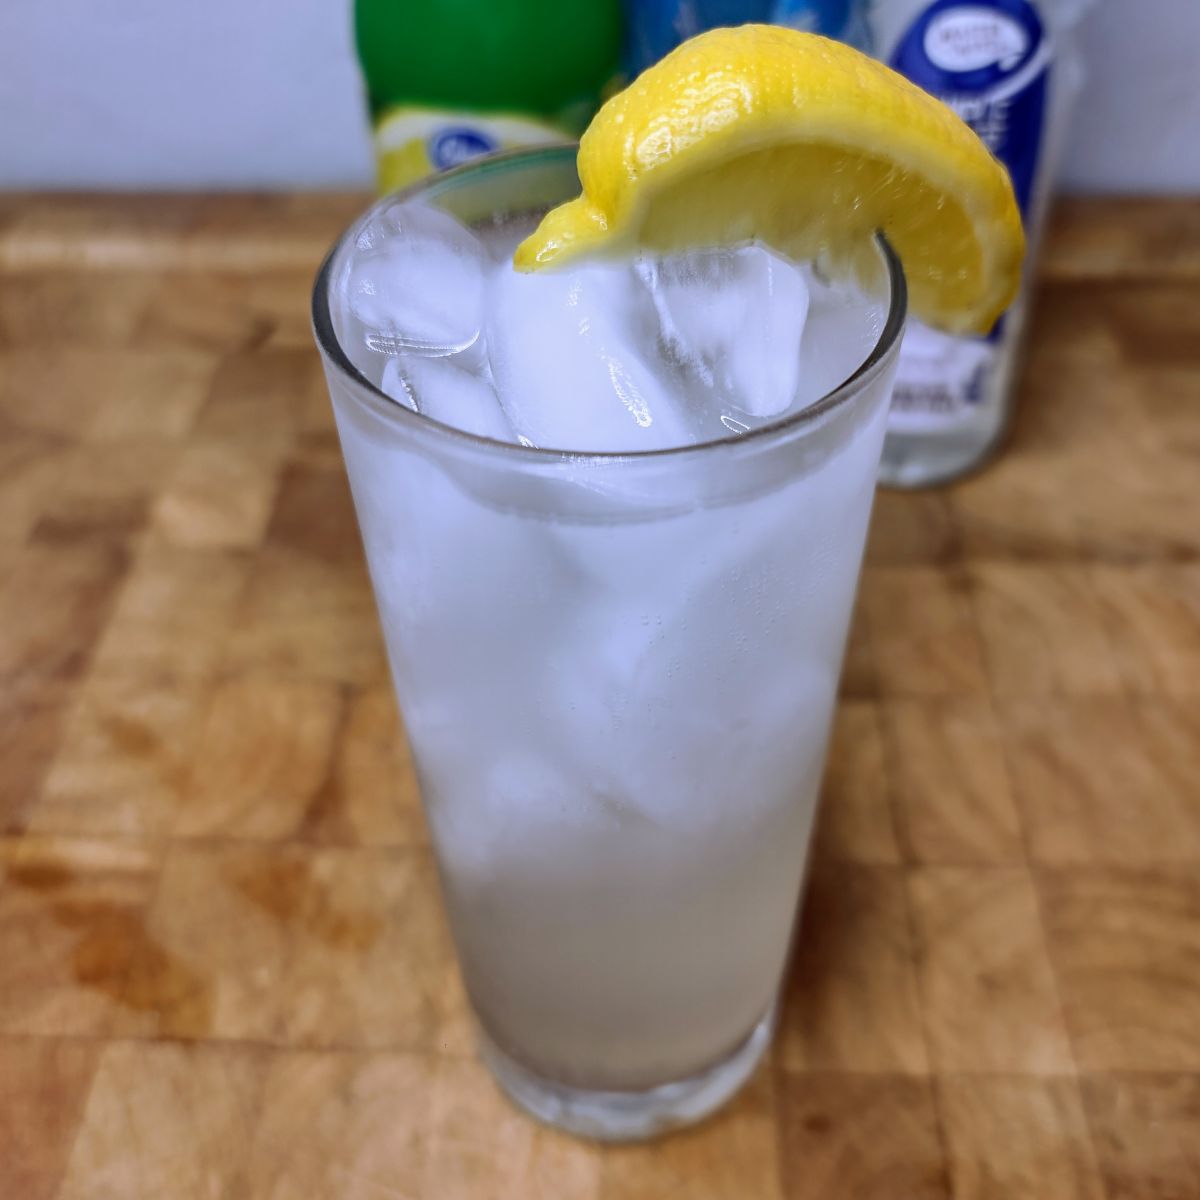 Sparkling Lemonade with a lemon wedge in the glass and ingredients in the background.